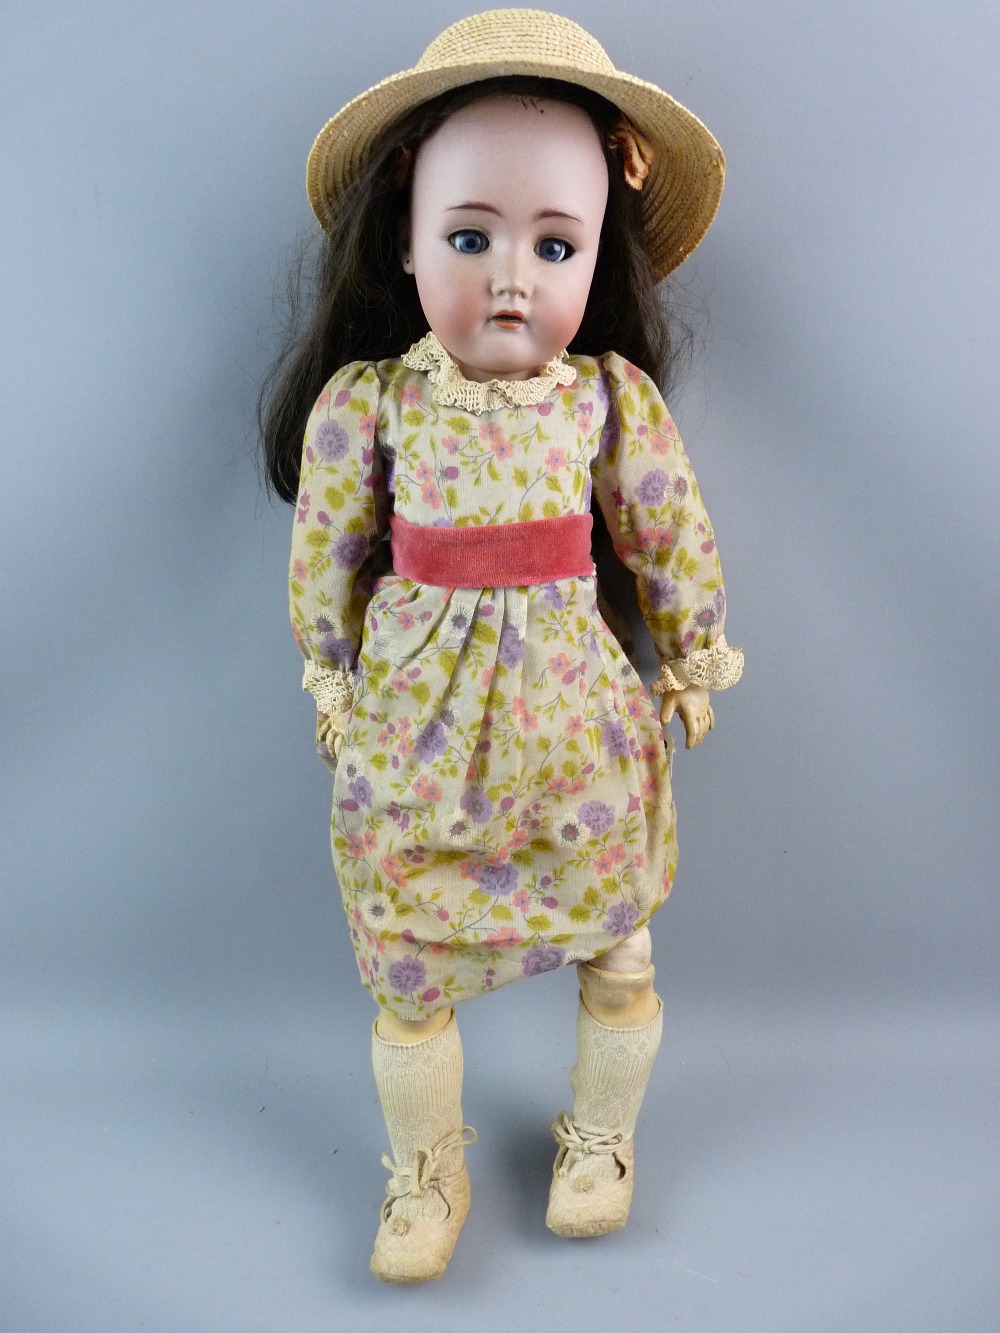 AN ANTIQUE BISQUE HEADED DOLL BY SIMON & HALBIG having a composition body and limbs with blue eyes